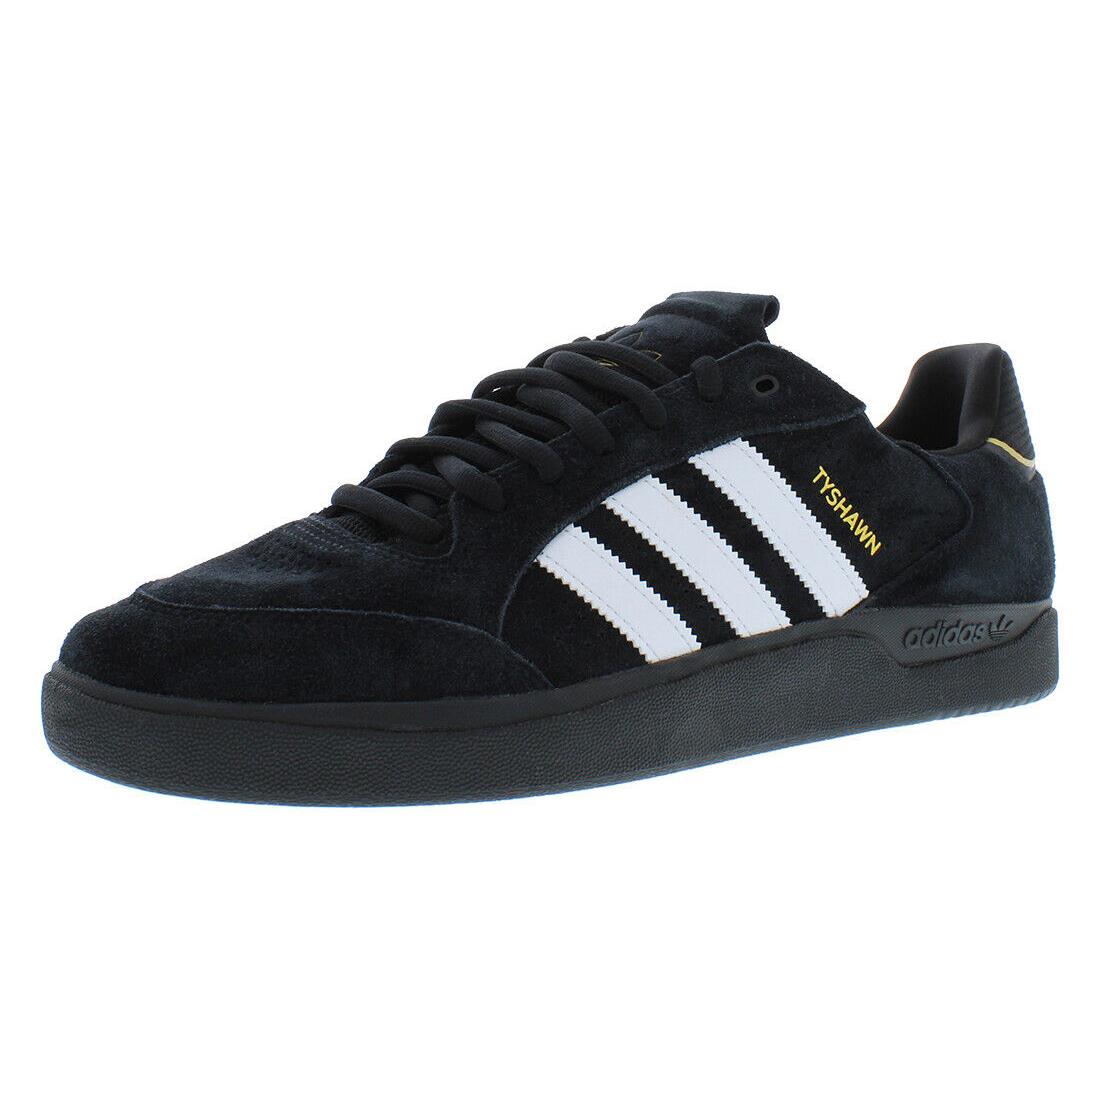 Adidas Tyshawn Low Mens Shoes Size 14 Color: Core Black/cloud White/gold - Core Black/Cloud White/Gold Metallic, Main: Black